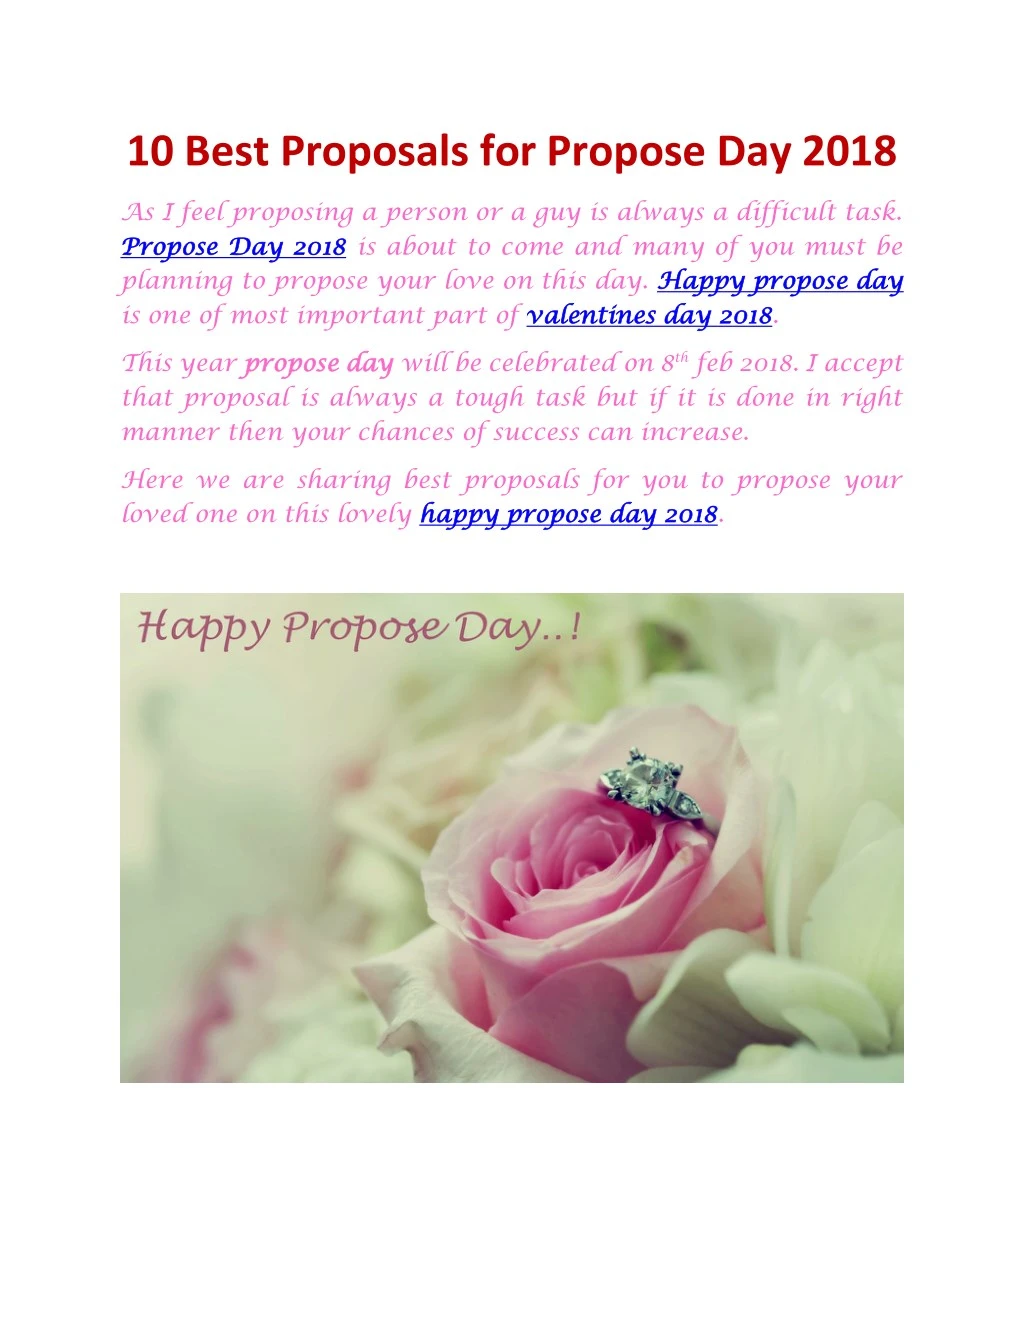 10 best proposals for propose day 2018